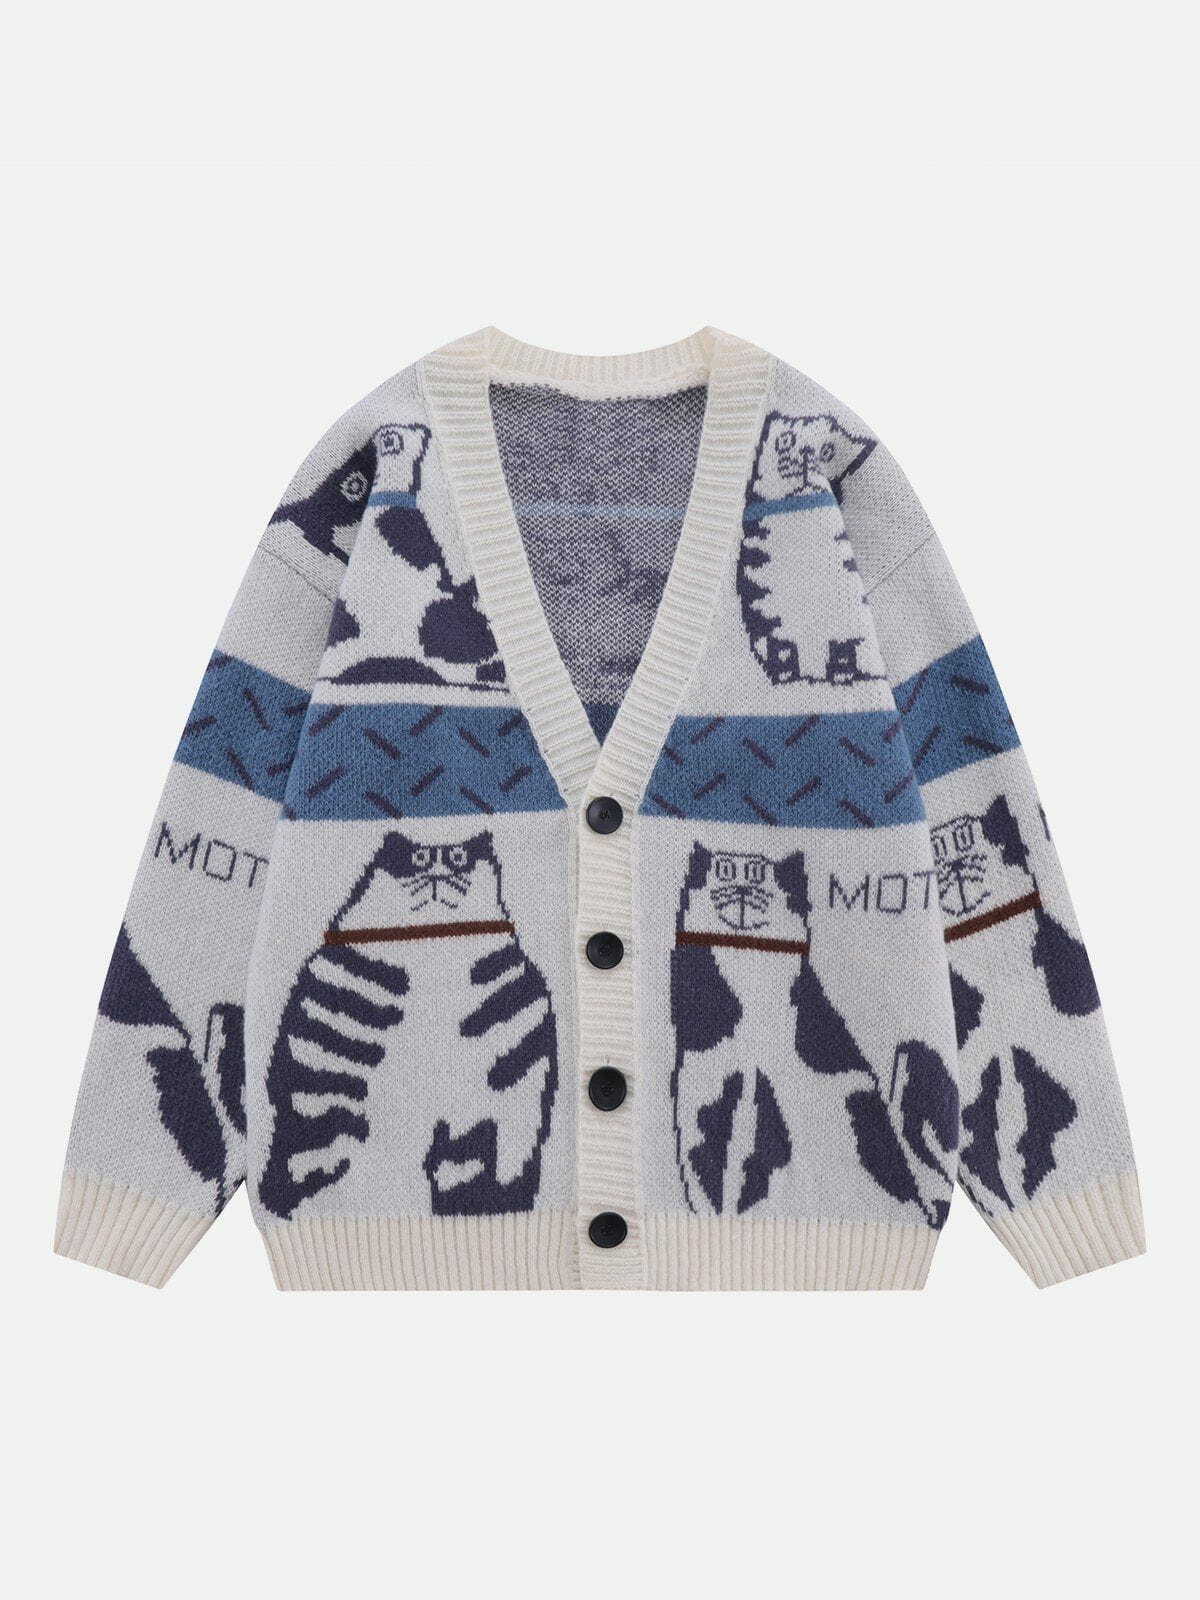 adorable cat cardigan quirky & chic streetwear 7719